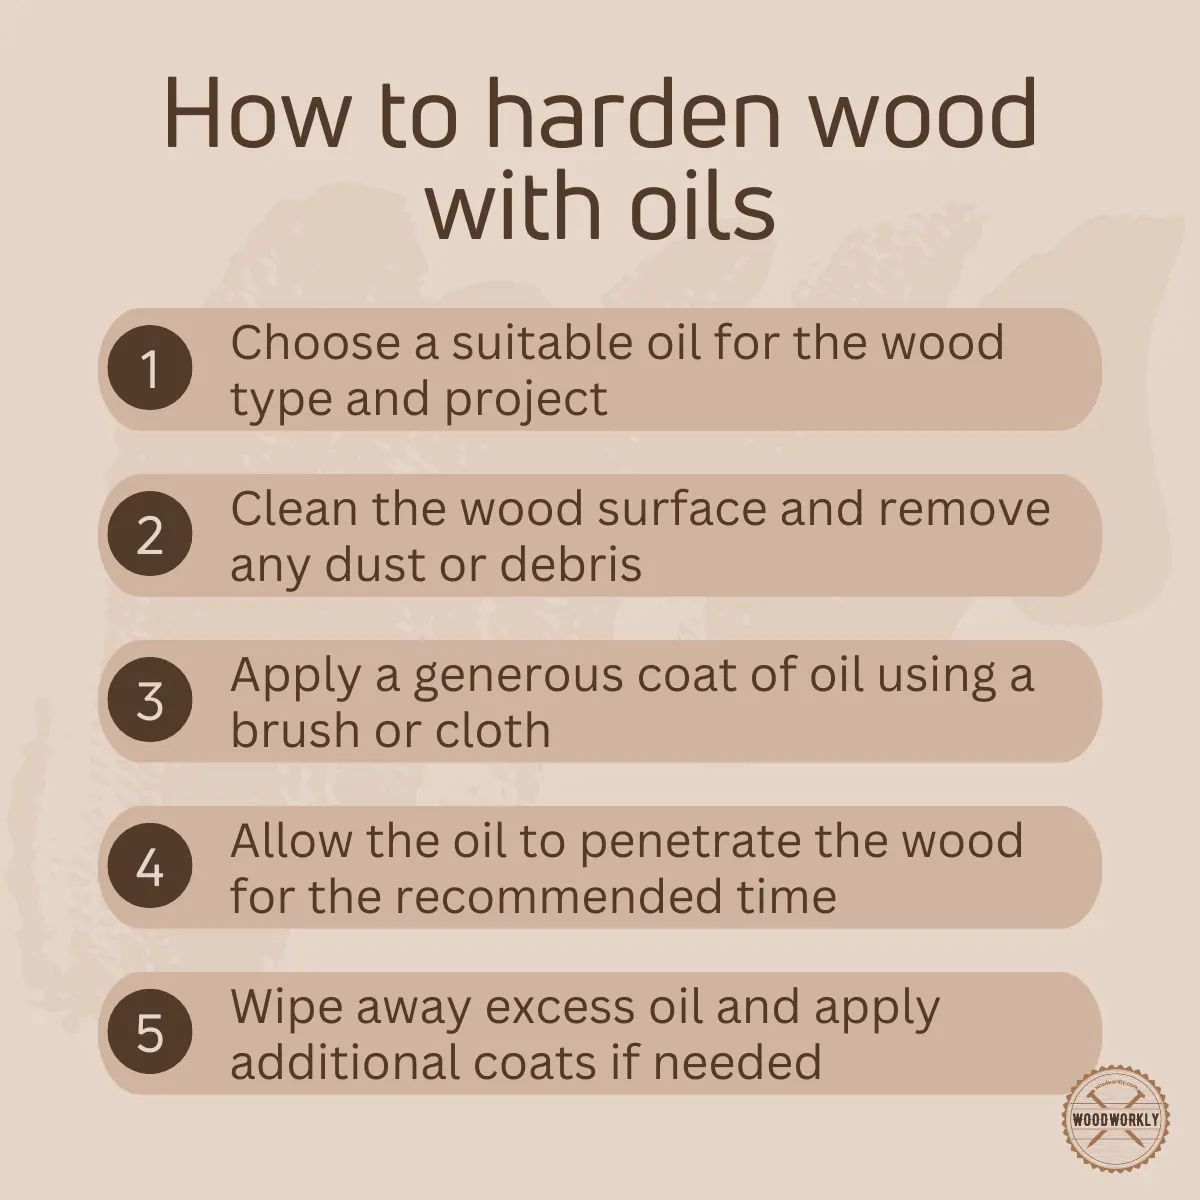 How to harden wood with oils